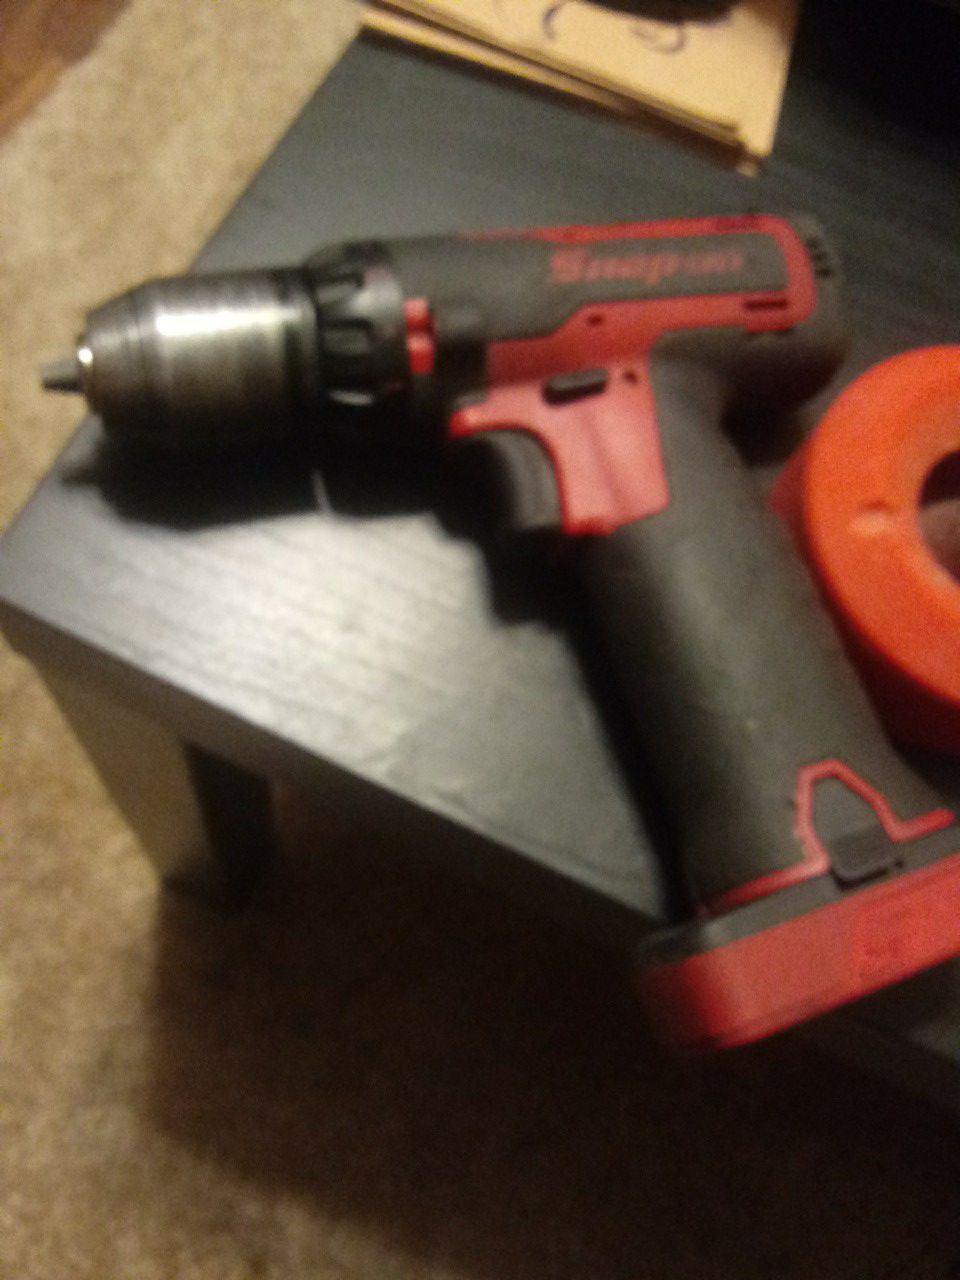 Snap-on 14.2 brushless drill/driver